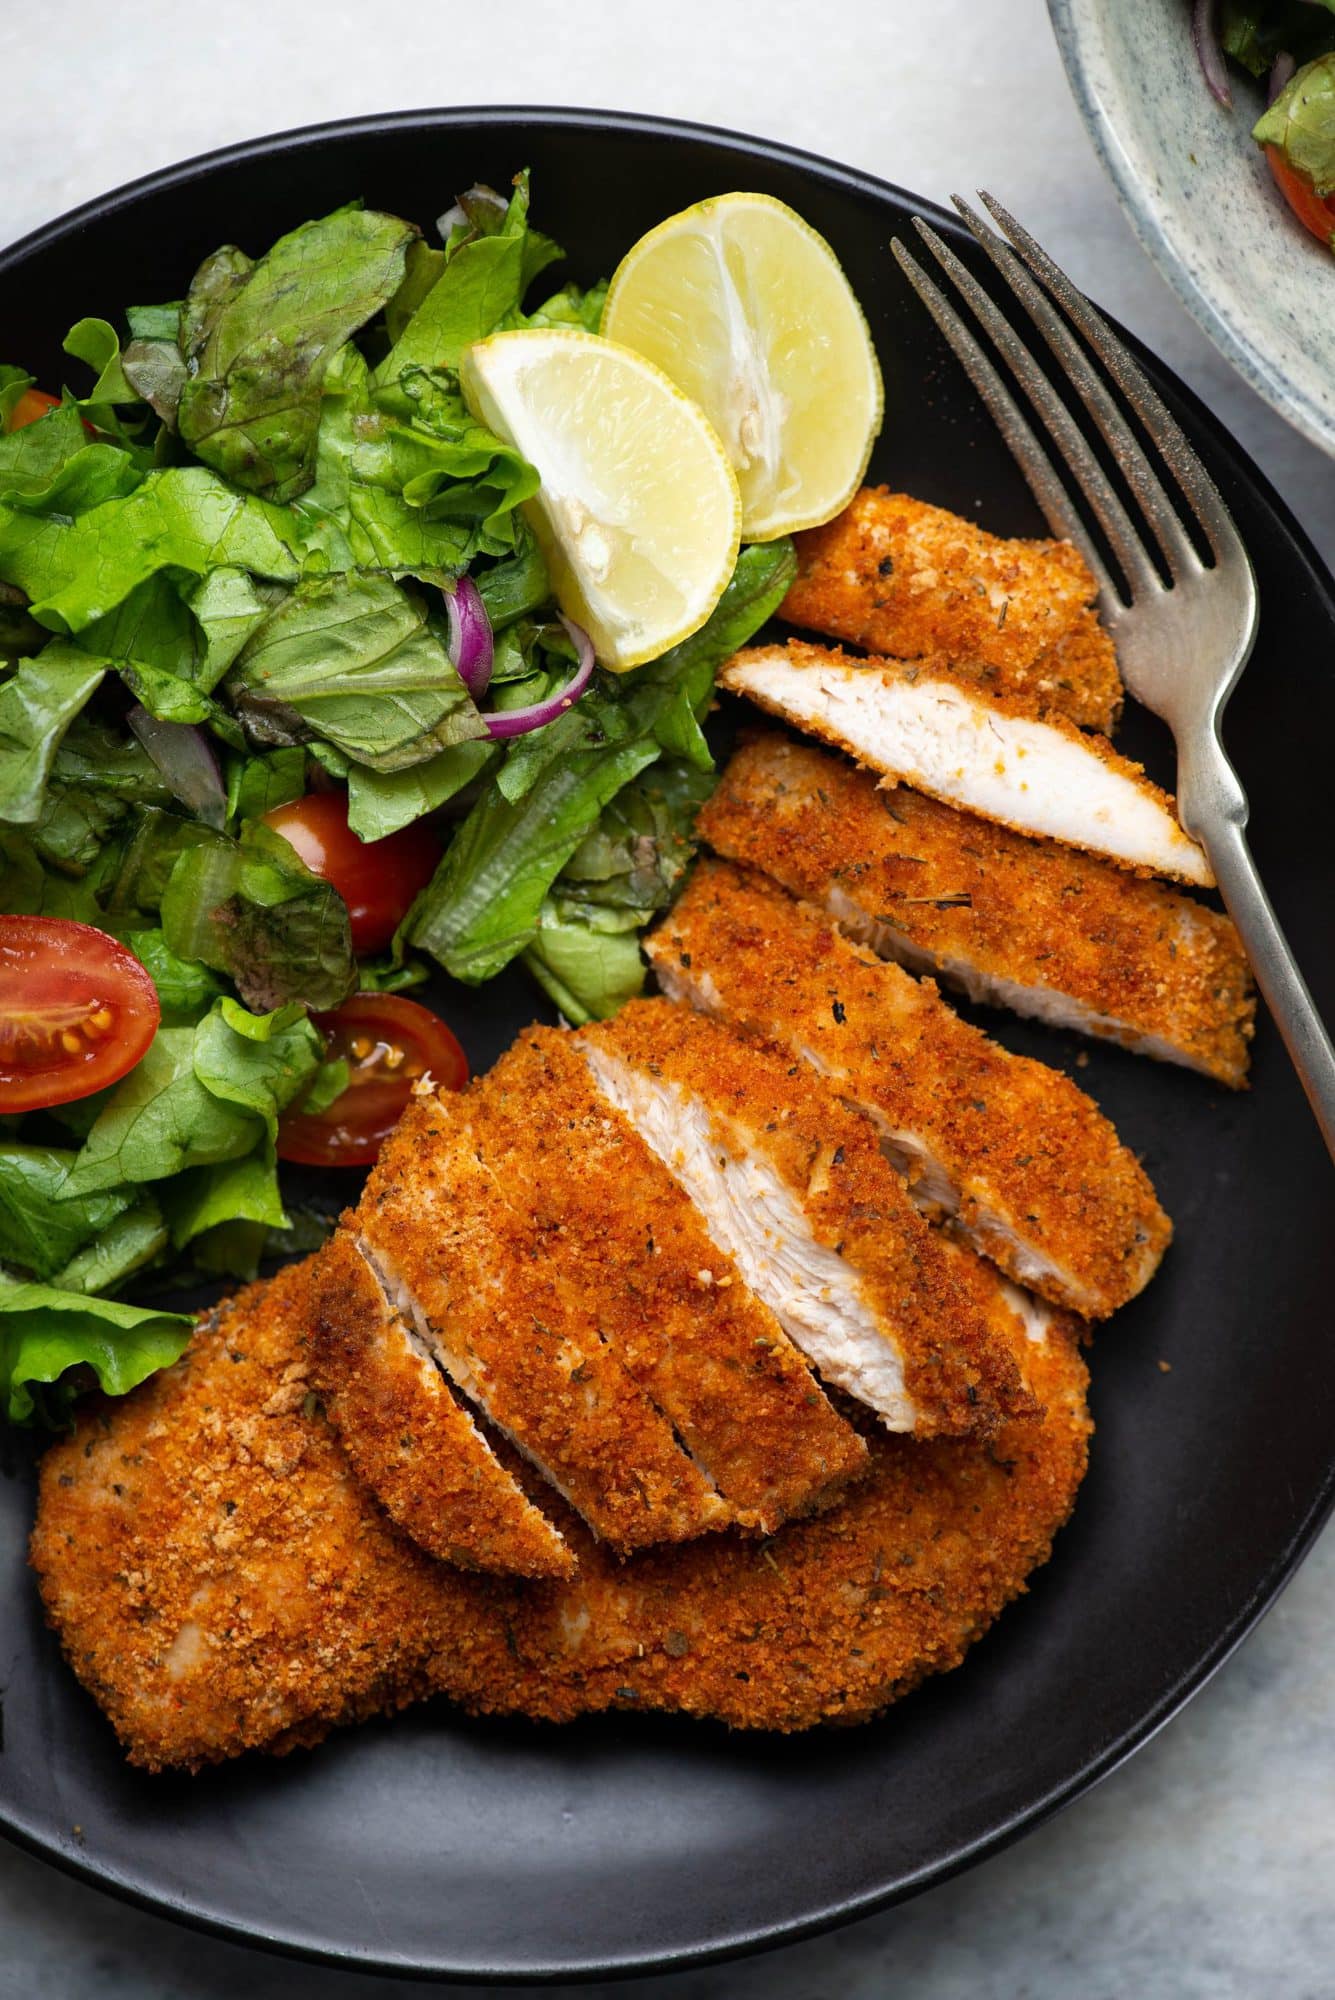 Sliced crispy crusty chicken breasts served with chopped lettuce, cherry tomatoes and lemon on a black plate.